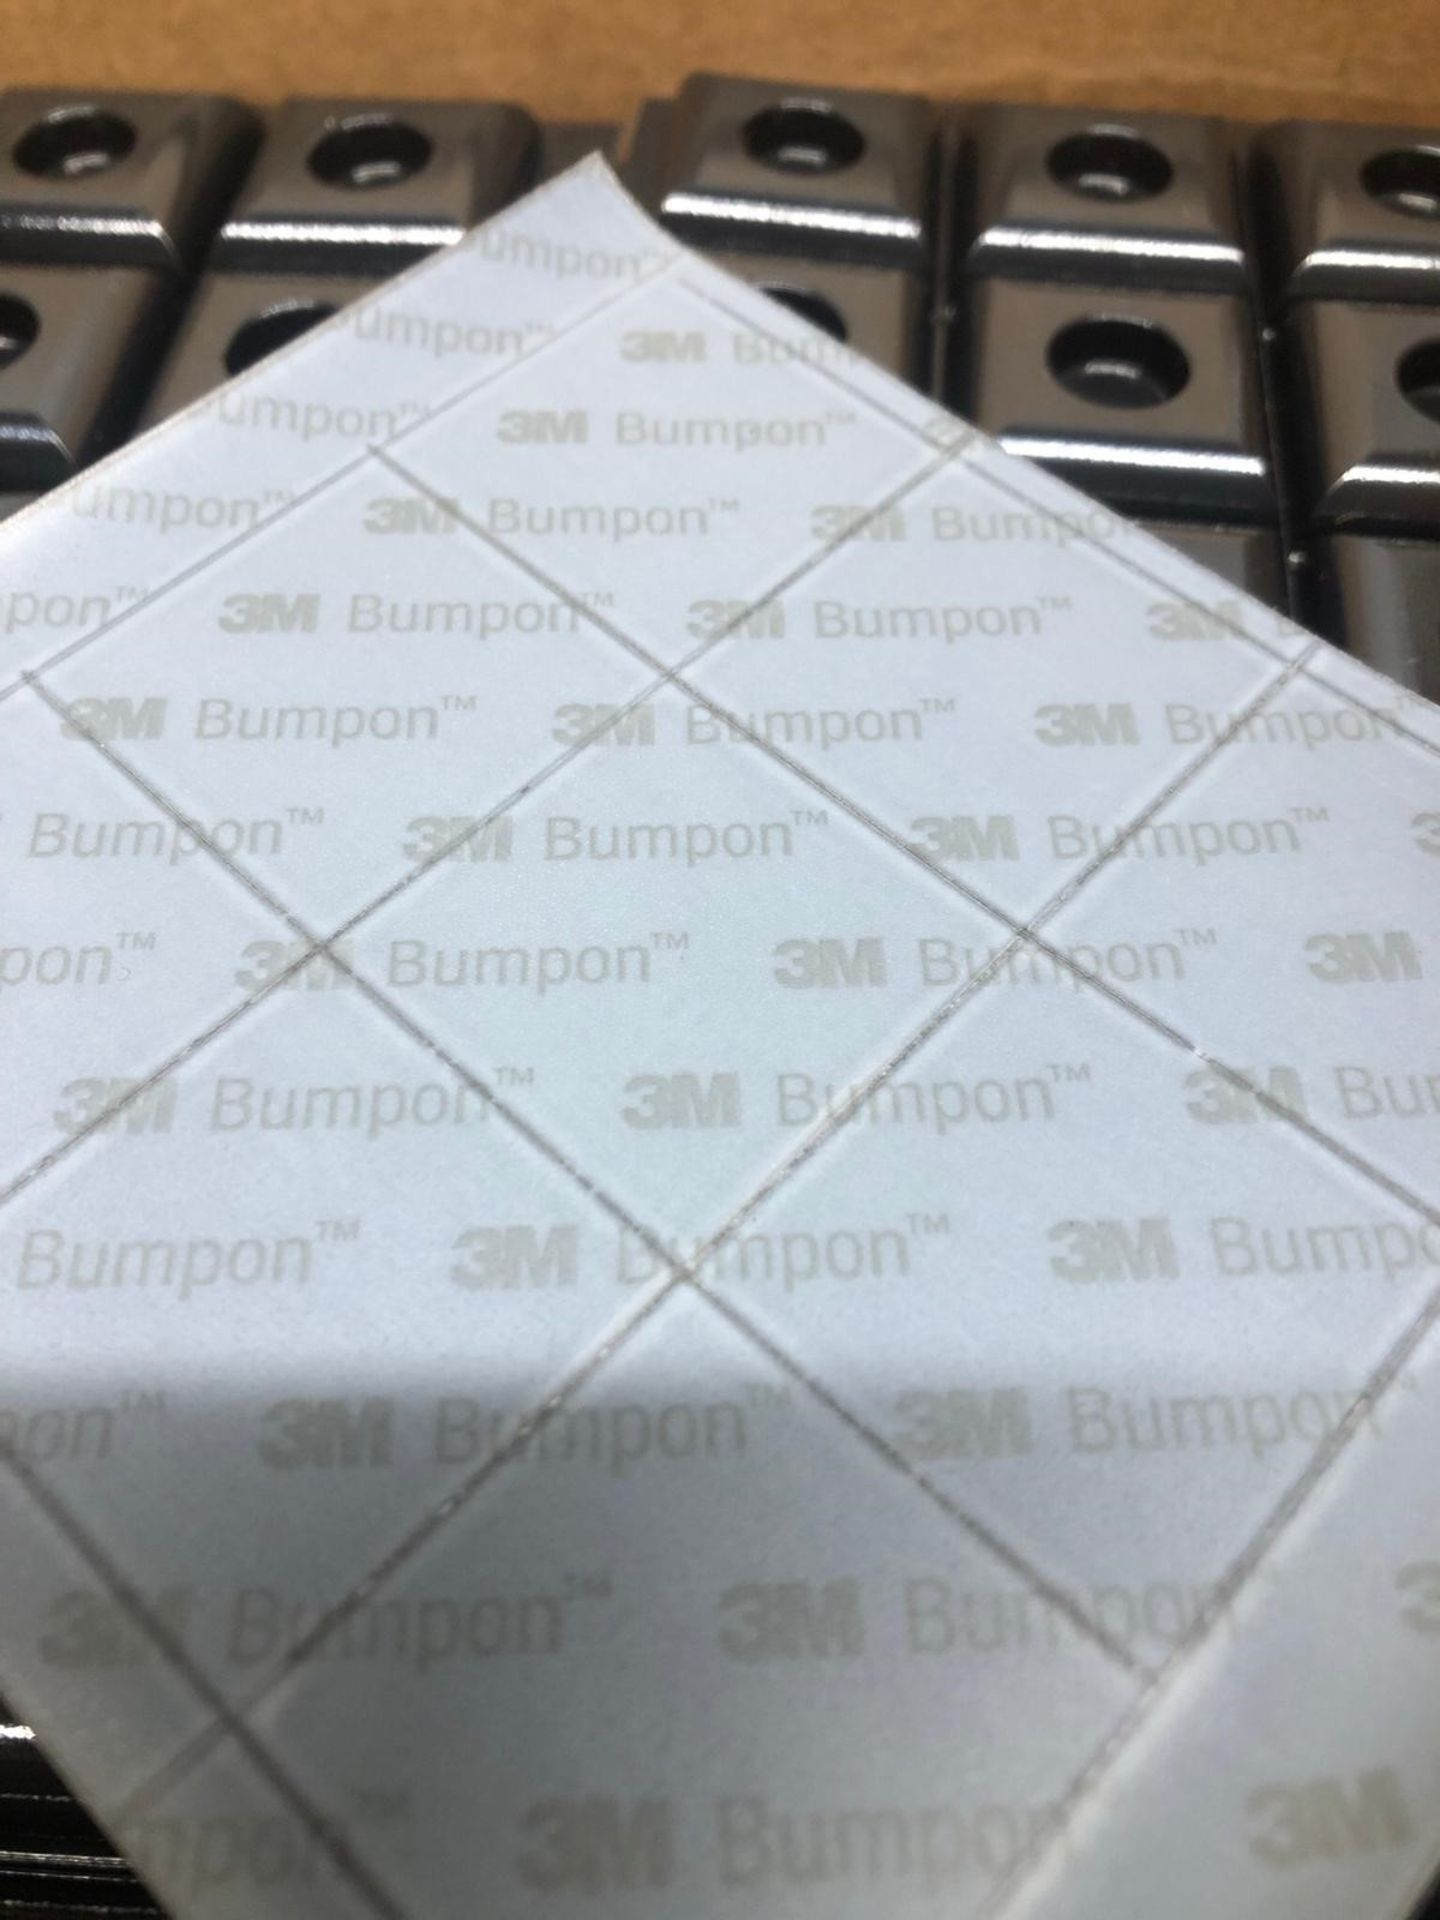 1000 x 3M Bumpons Sticky Anti Scratch Feet Inch x Inch Self Adhesive - Image 3 of 4